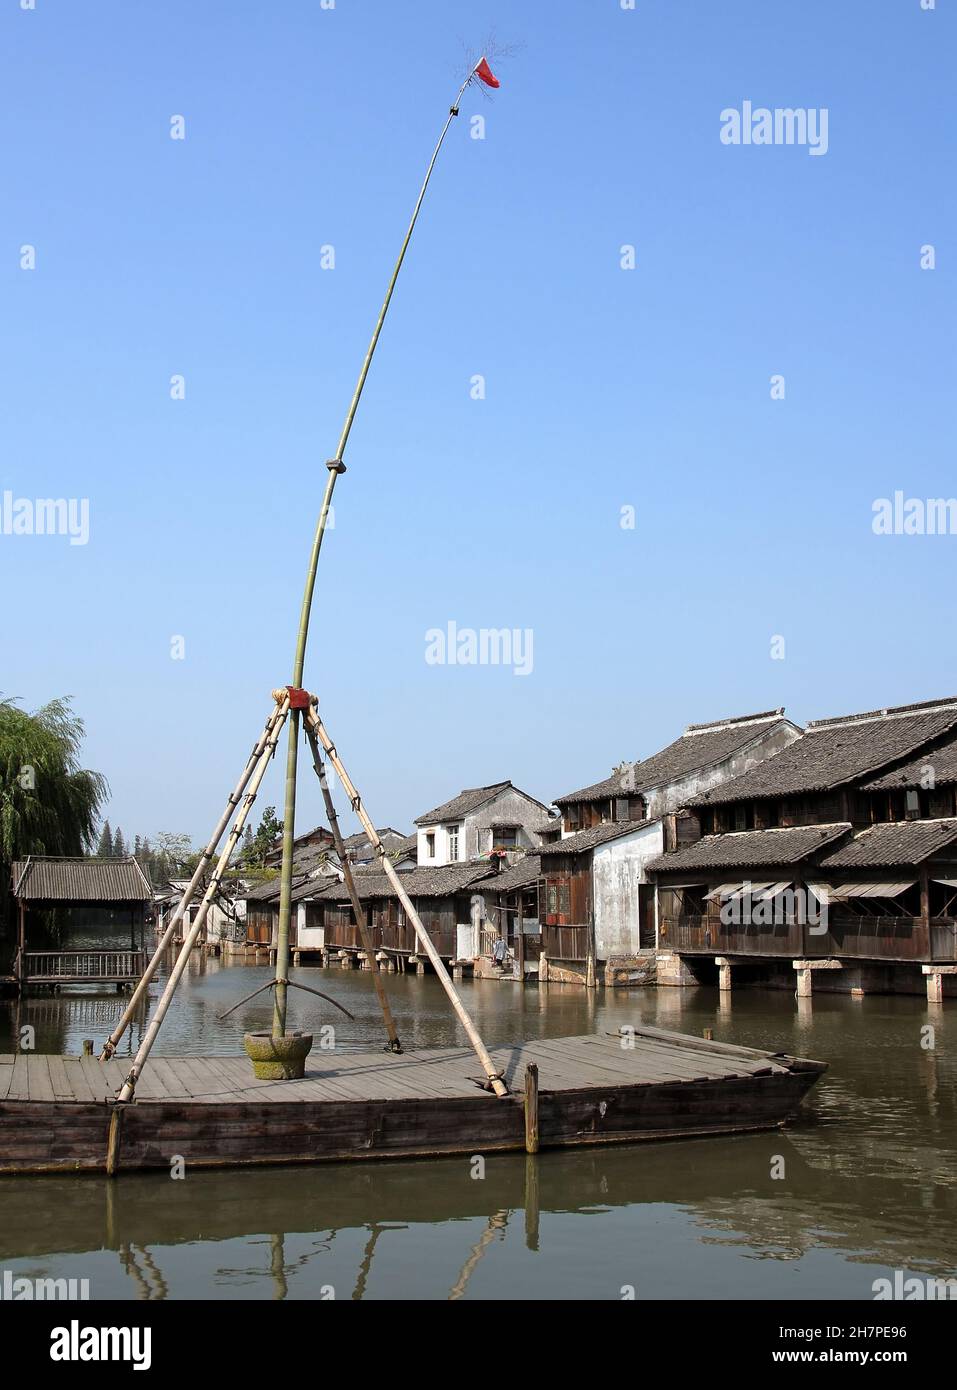 Wuzhen Water Town, Zhejiang Province, China. A bamboo pole used by acrobats to perform for tourists visiting Wuzhen Canal Town. Stock Photo